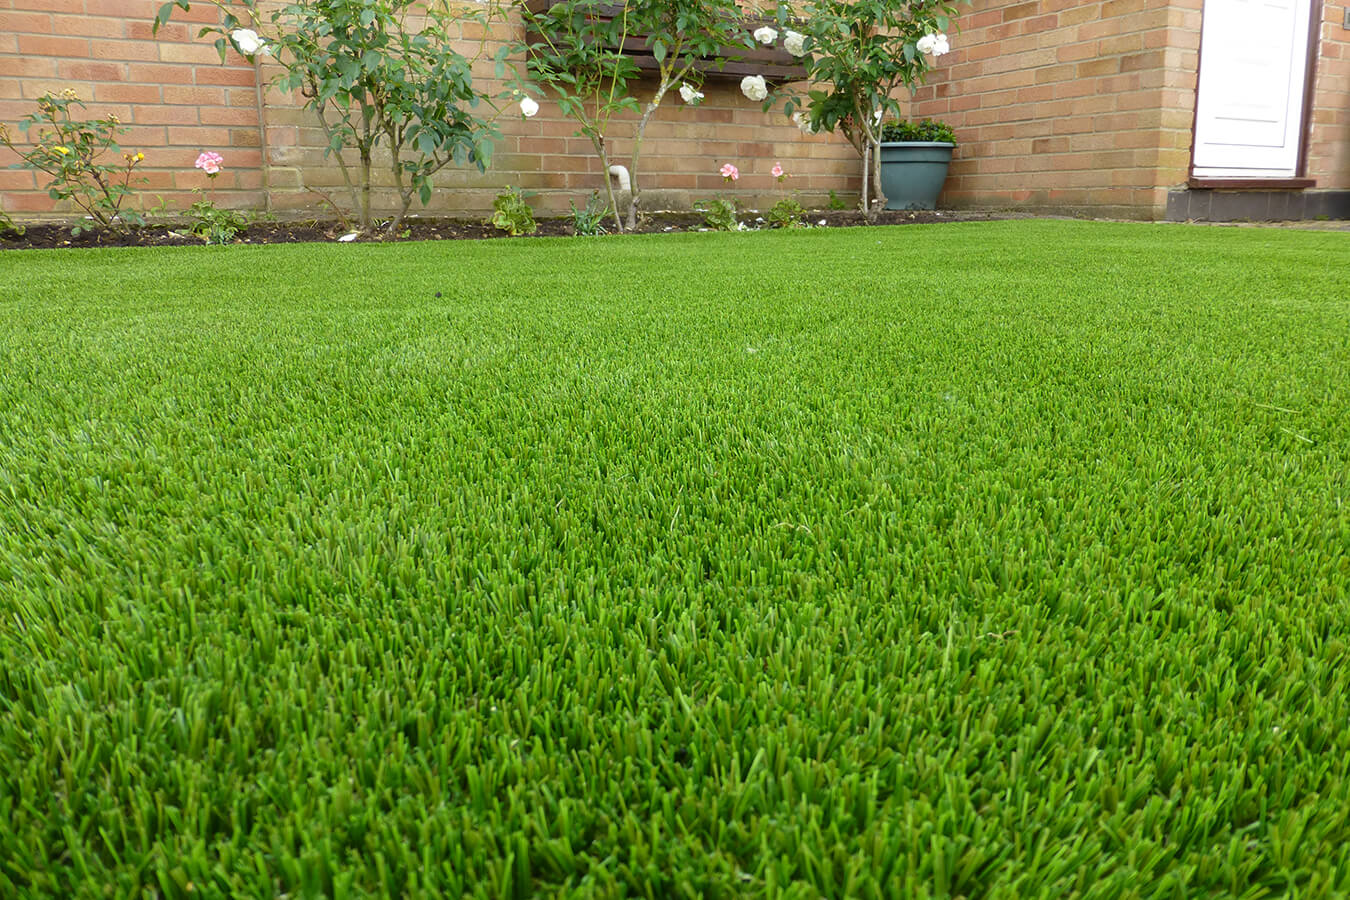 What are the Advantages of Artificial Grass for Home Deco?